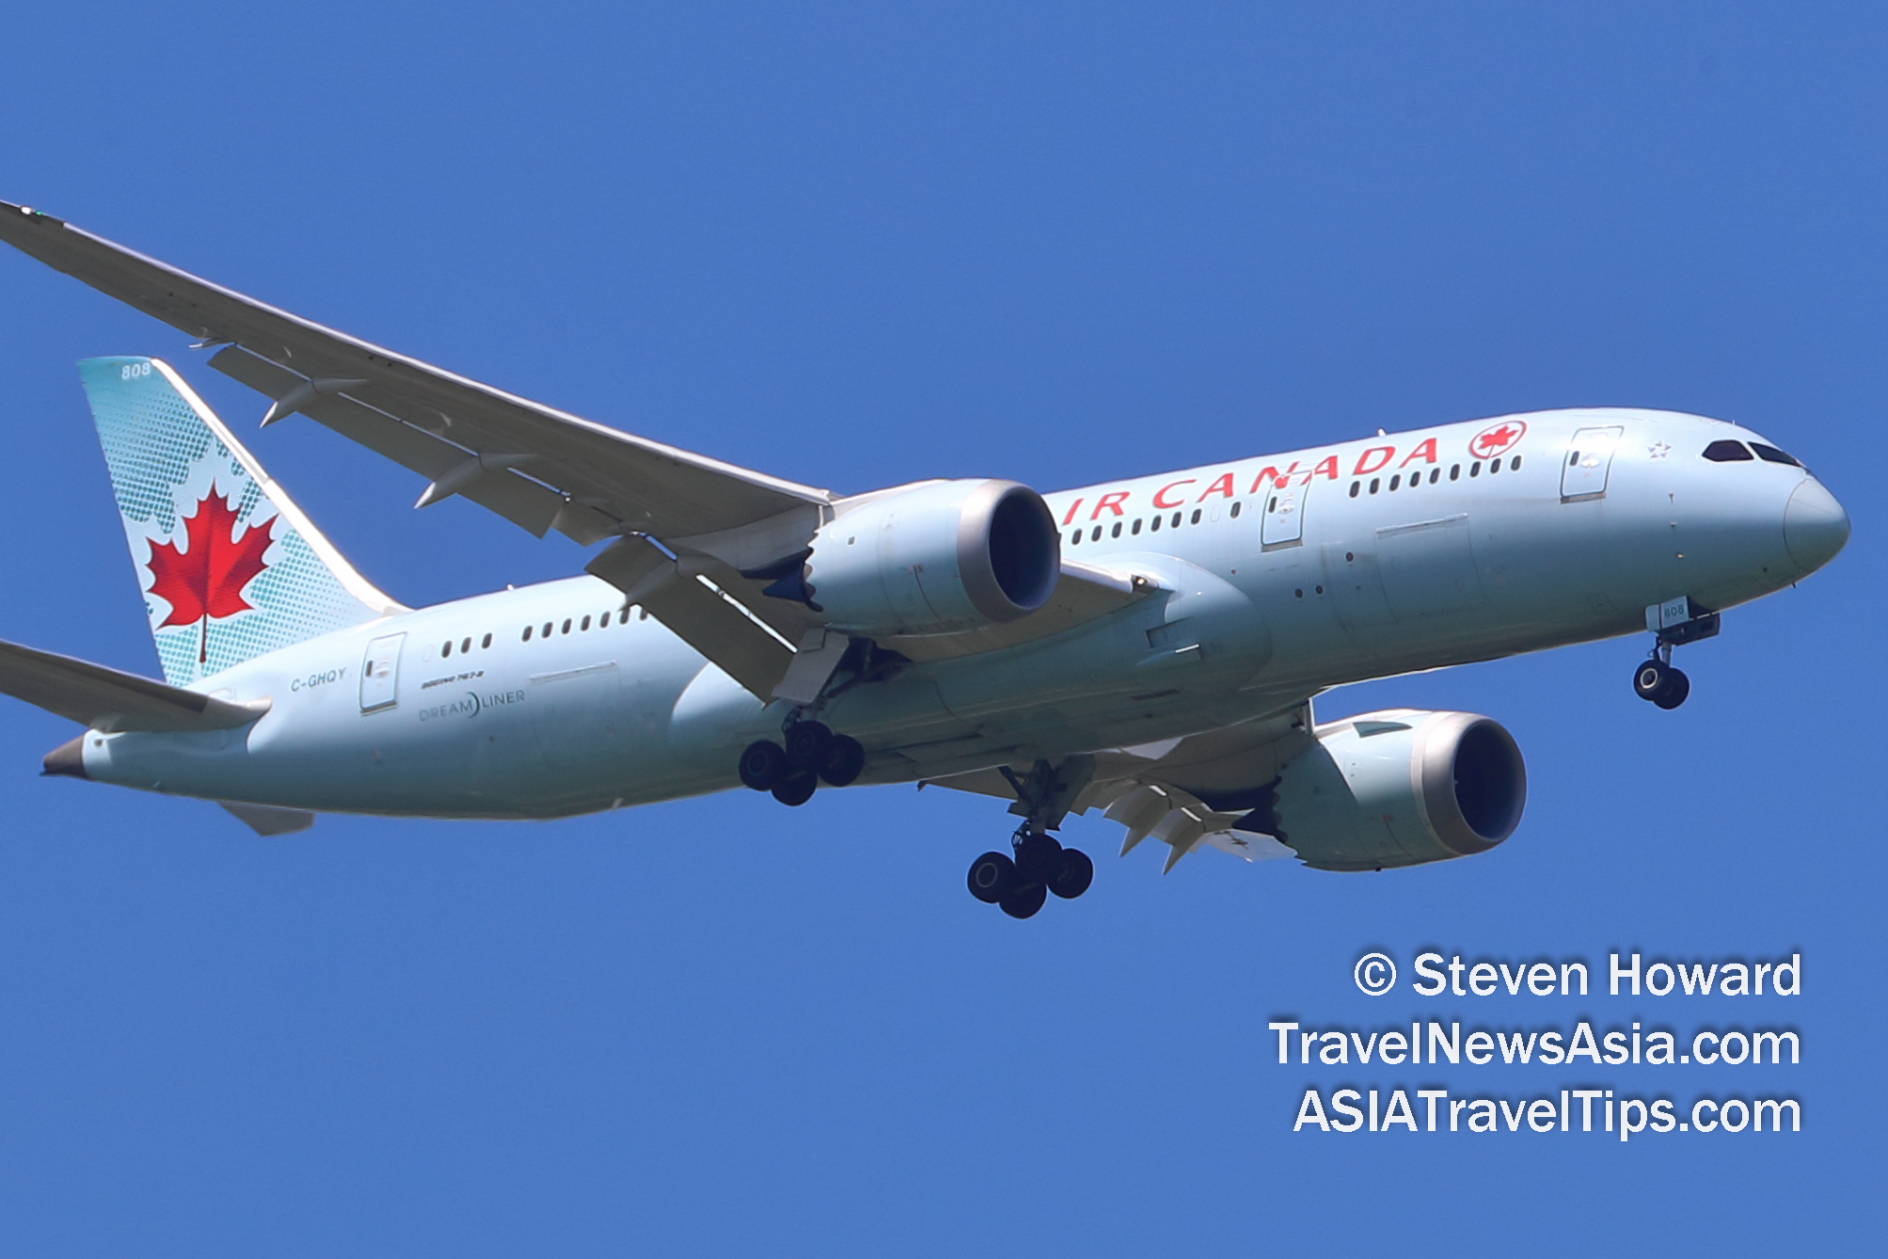 Air Canada Boeing 787-8 reg: C-GHQY. Picture by Steven Howard of TravelNewsAsia.com Click to enlarge.